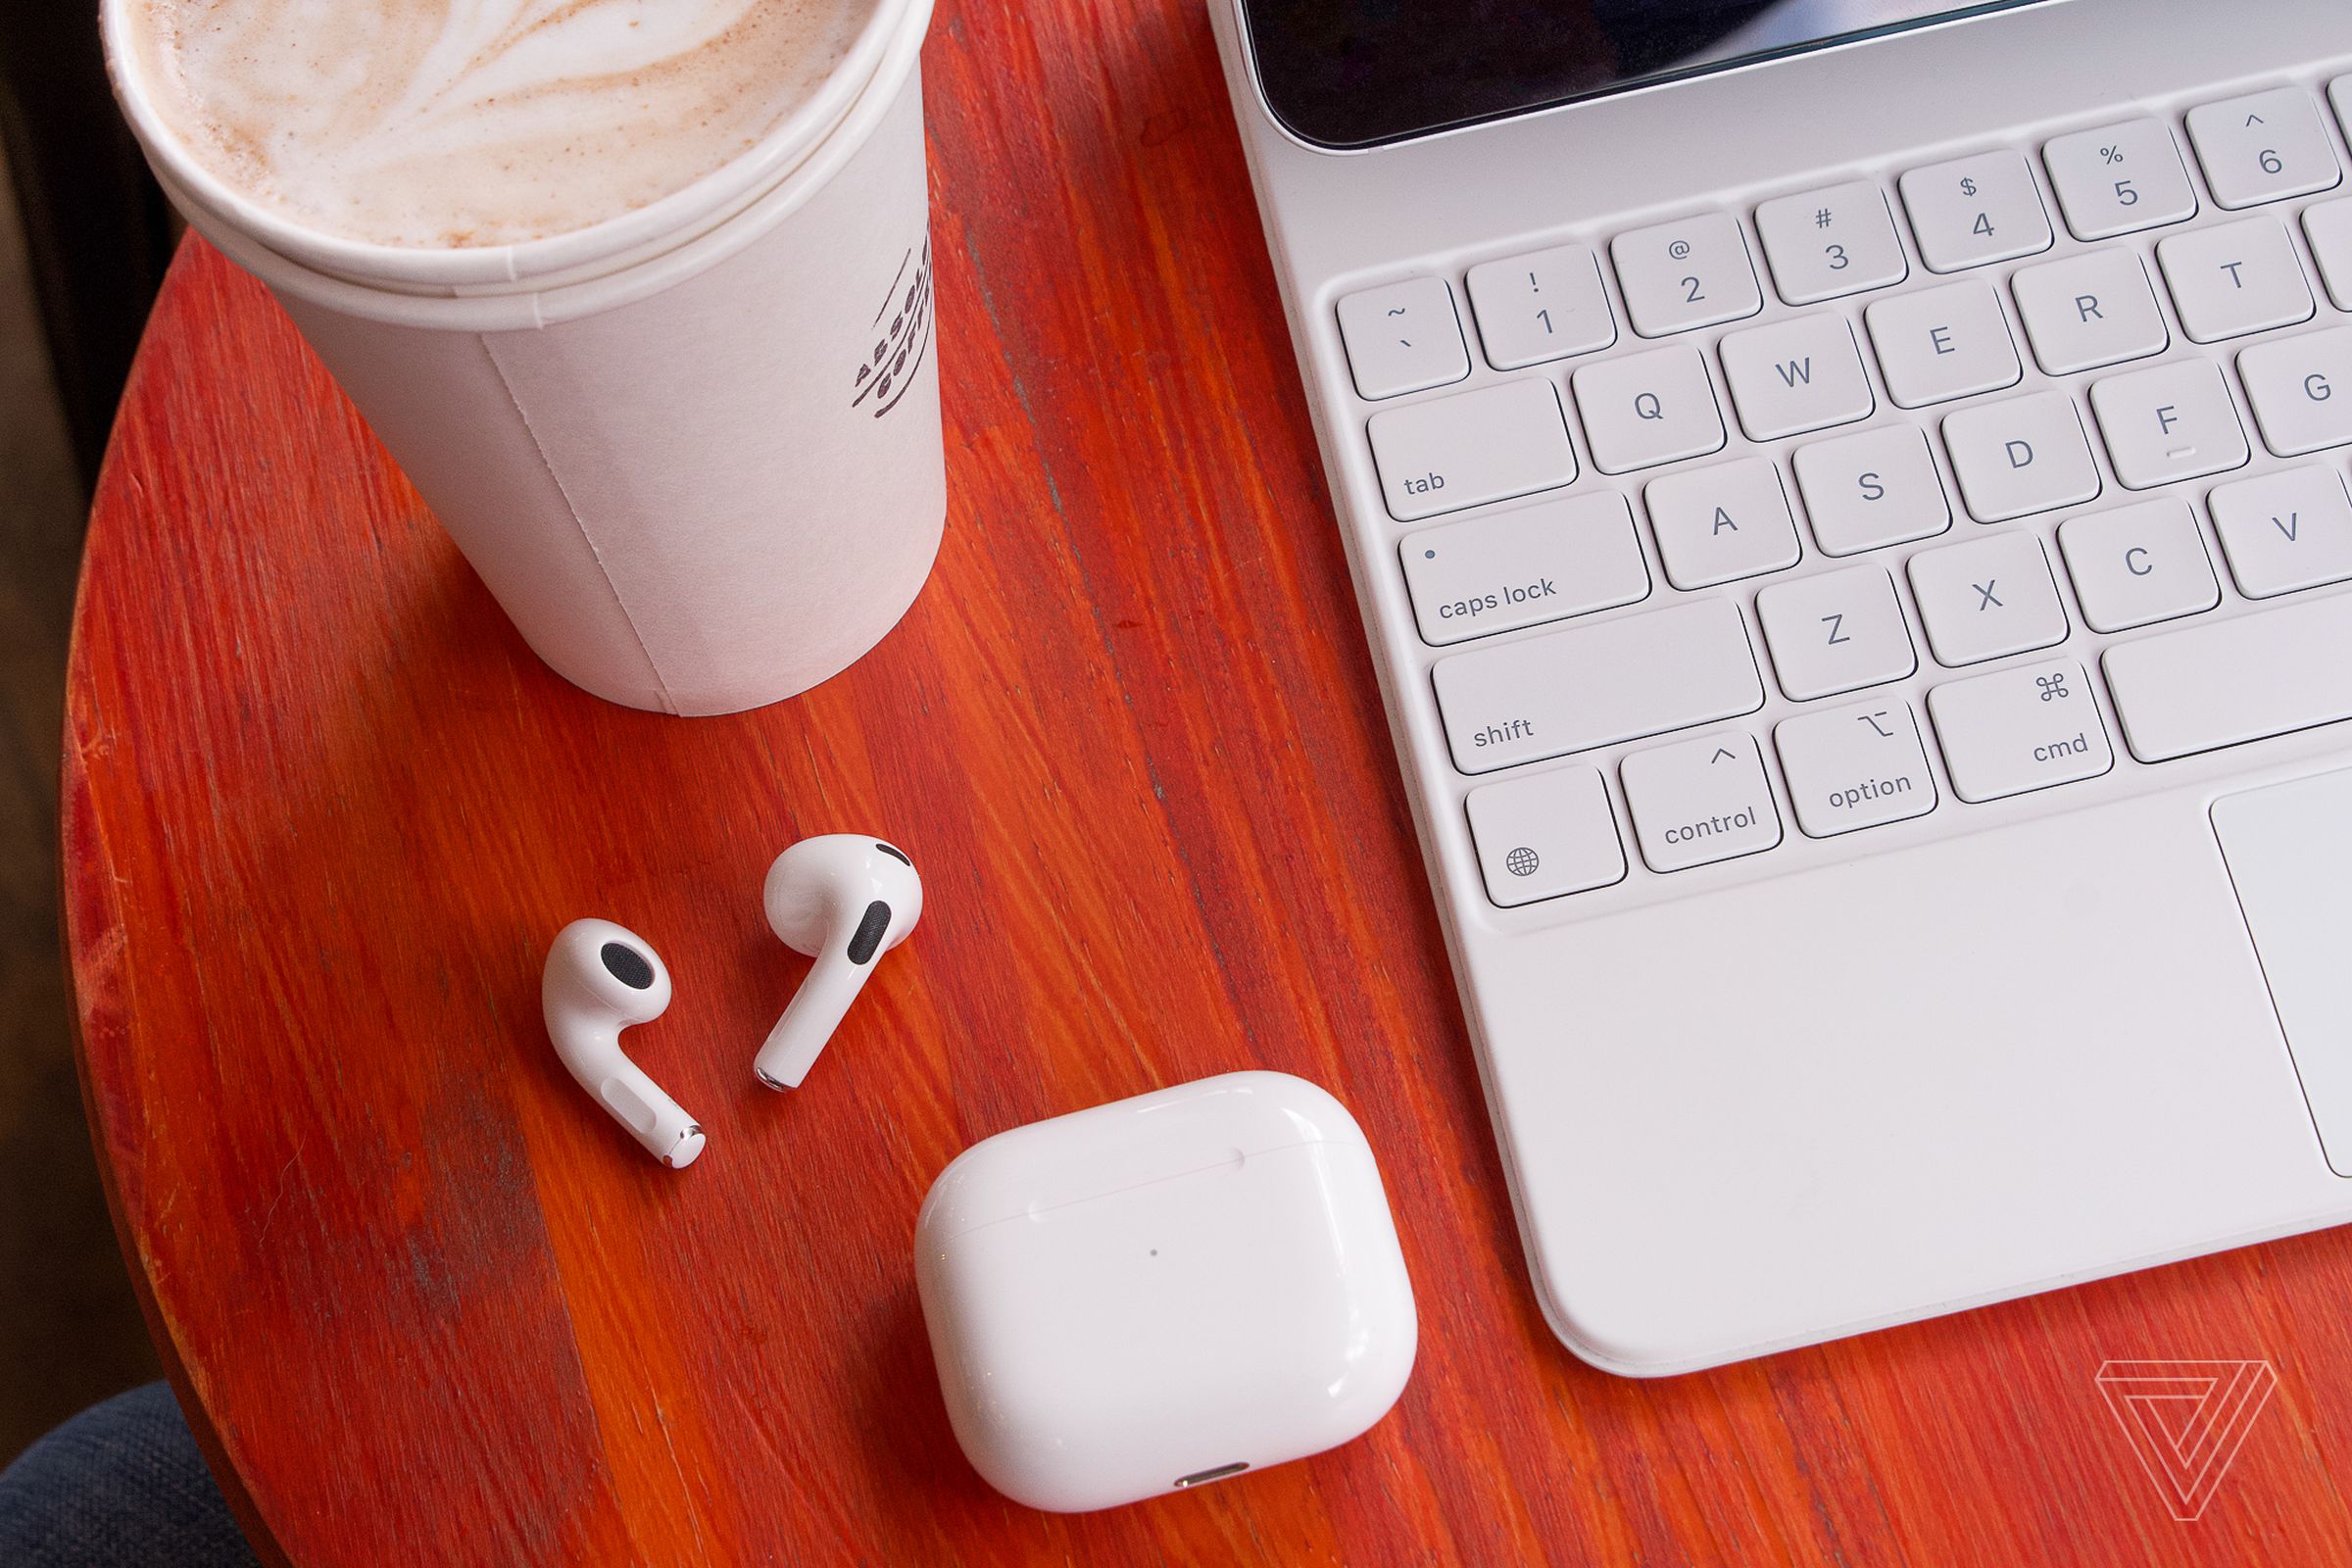 An image of Apple’s AirPods on a table beside a cup of coffee.